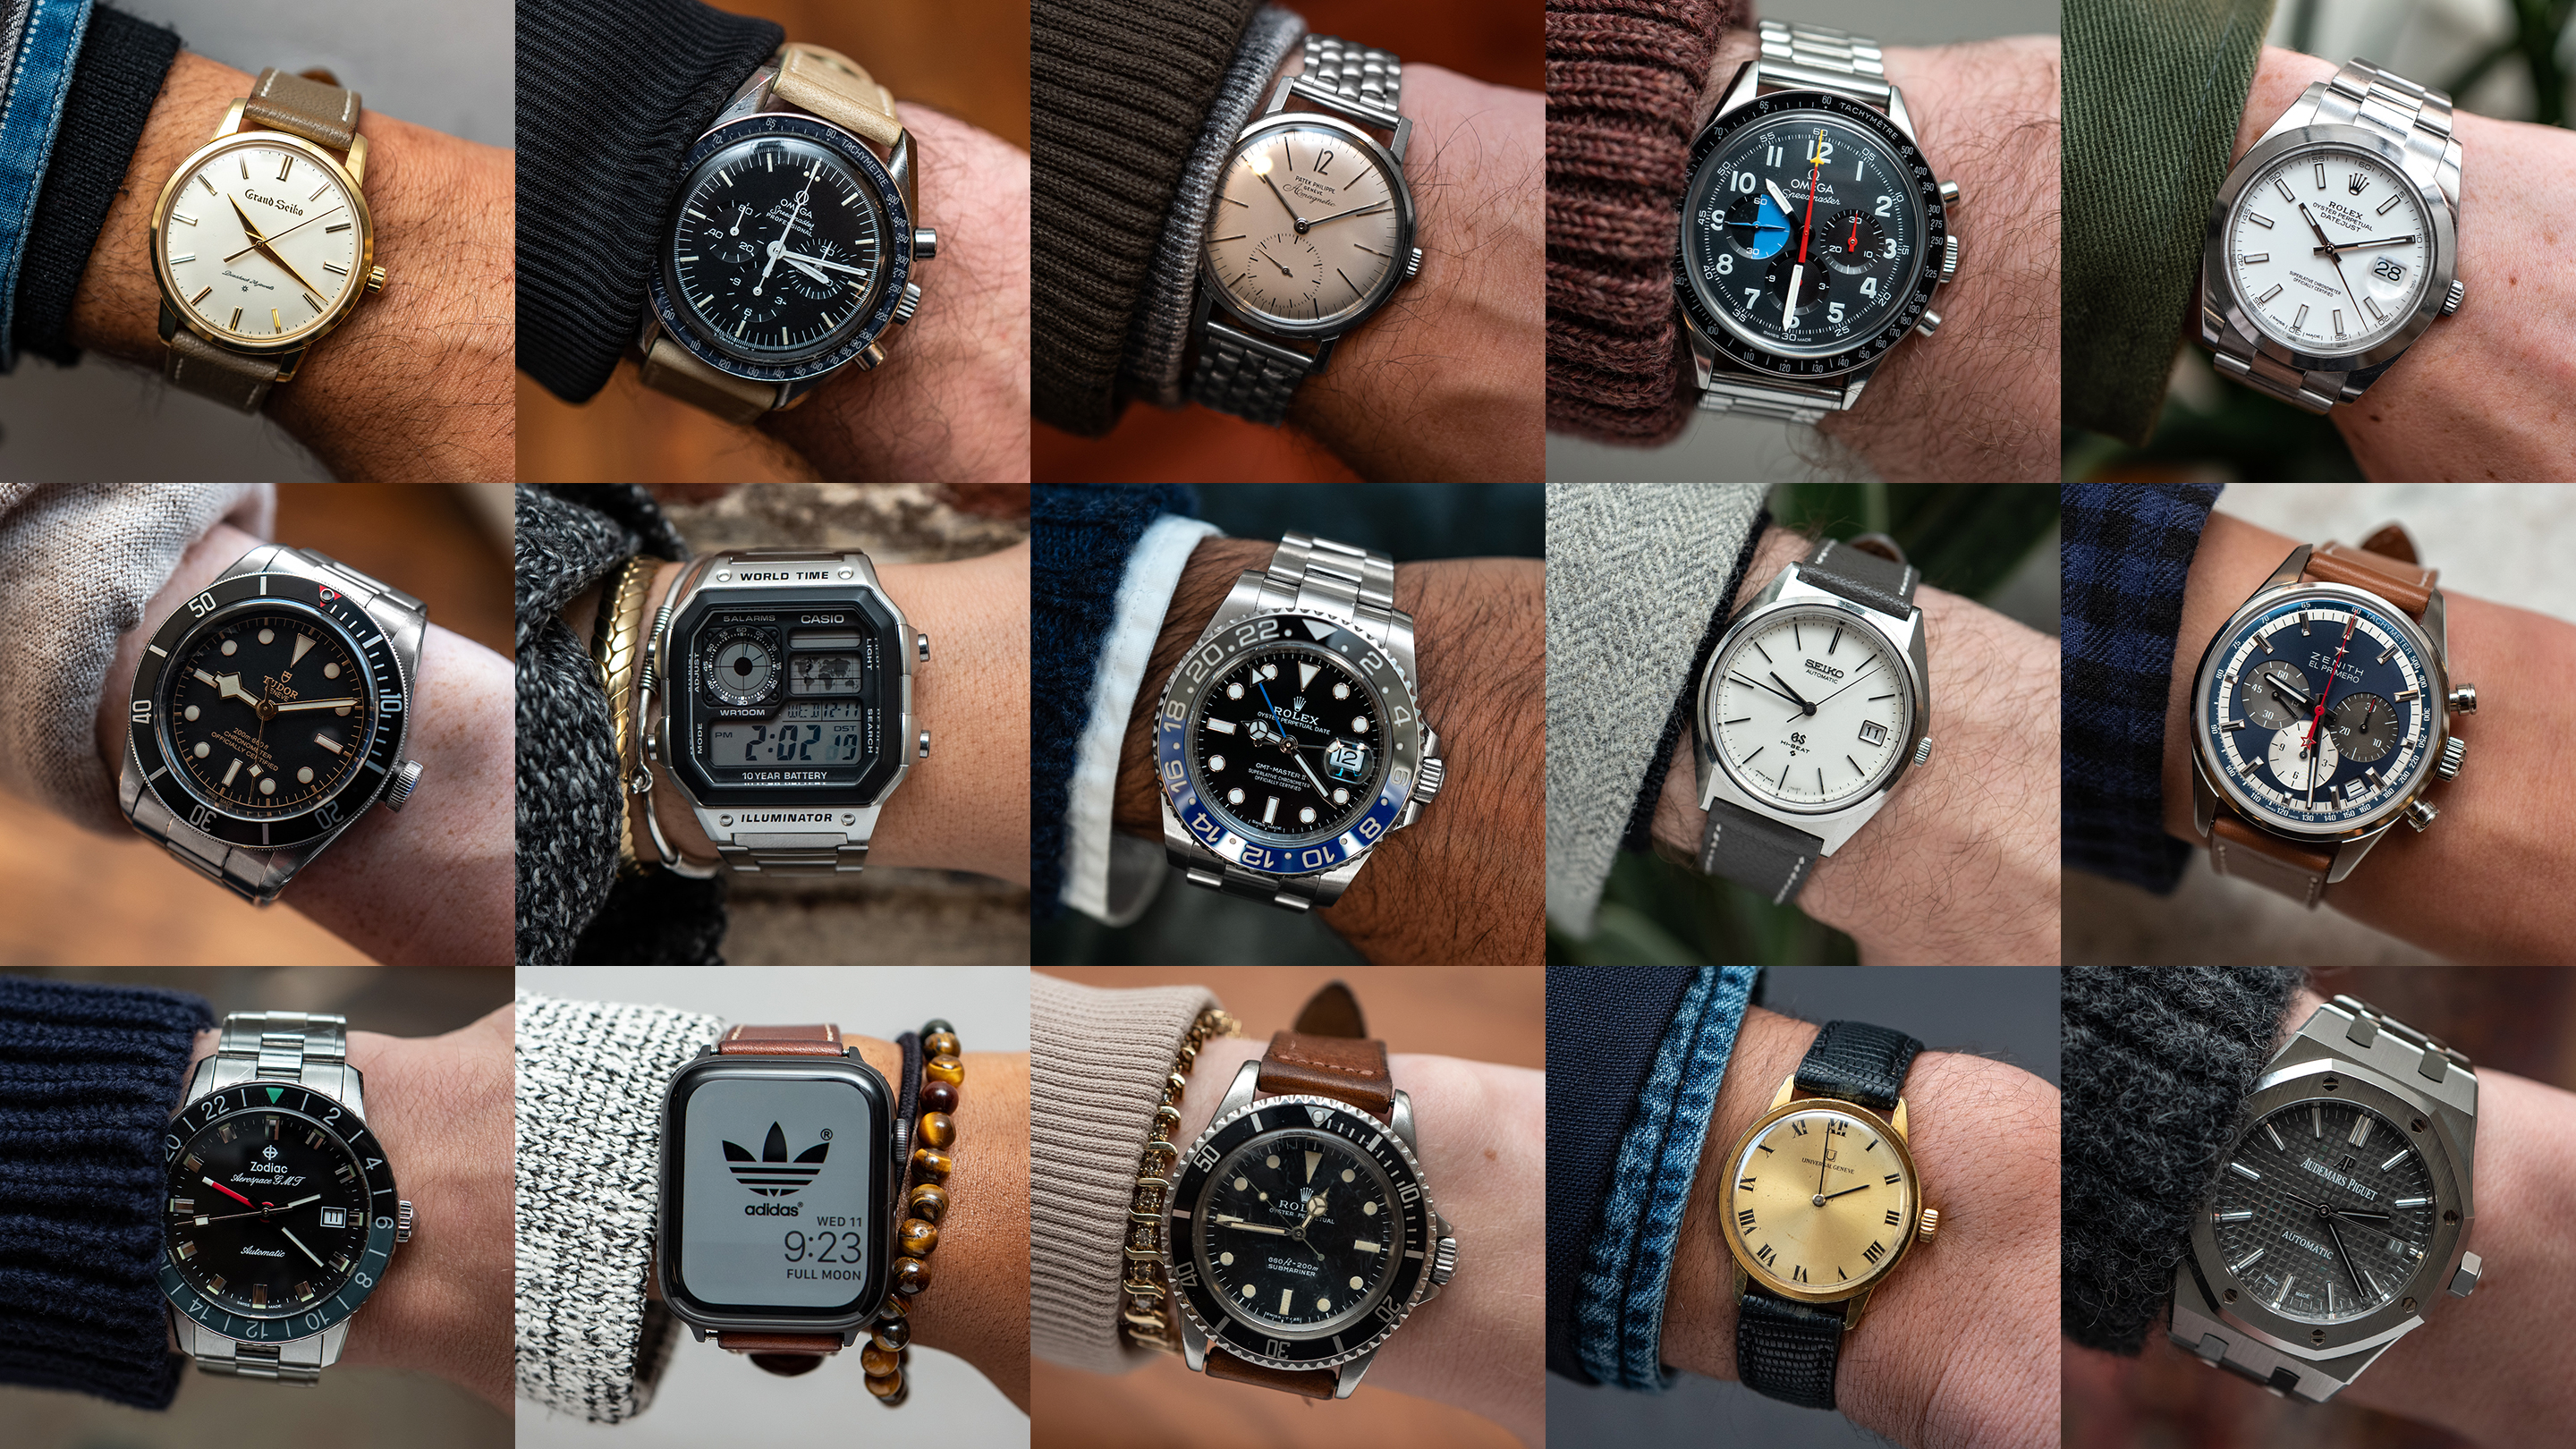 Blue watches. Do you have any? | Page 32 | WatchUSeek Watch Forums